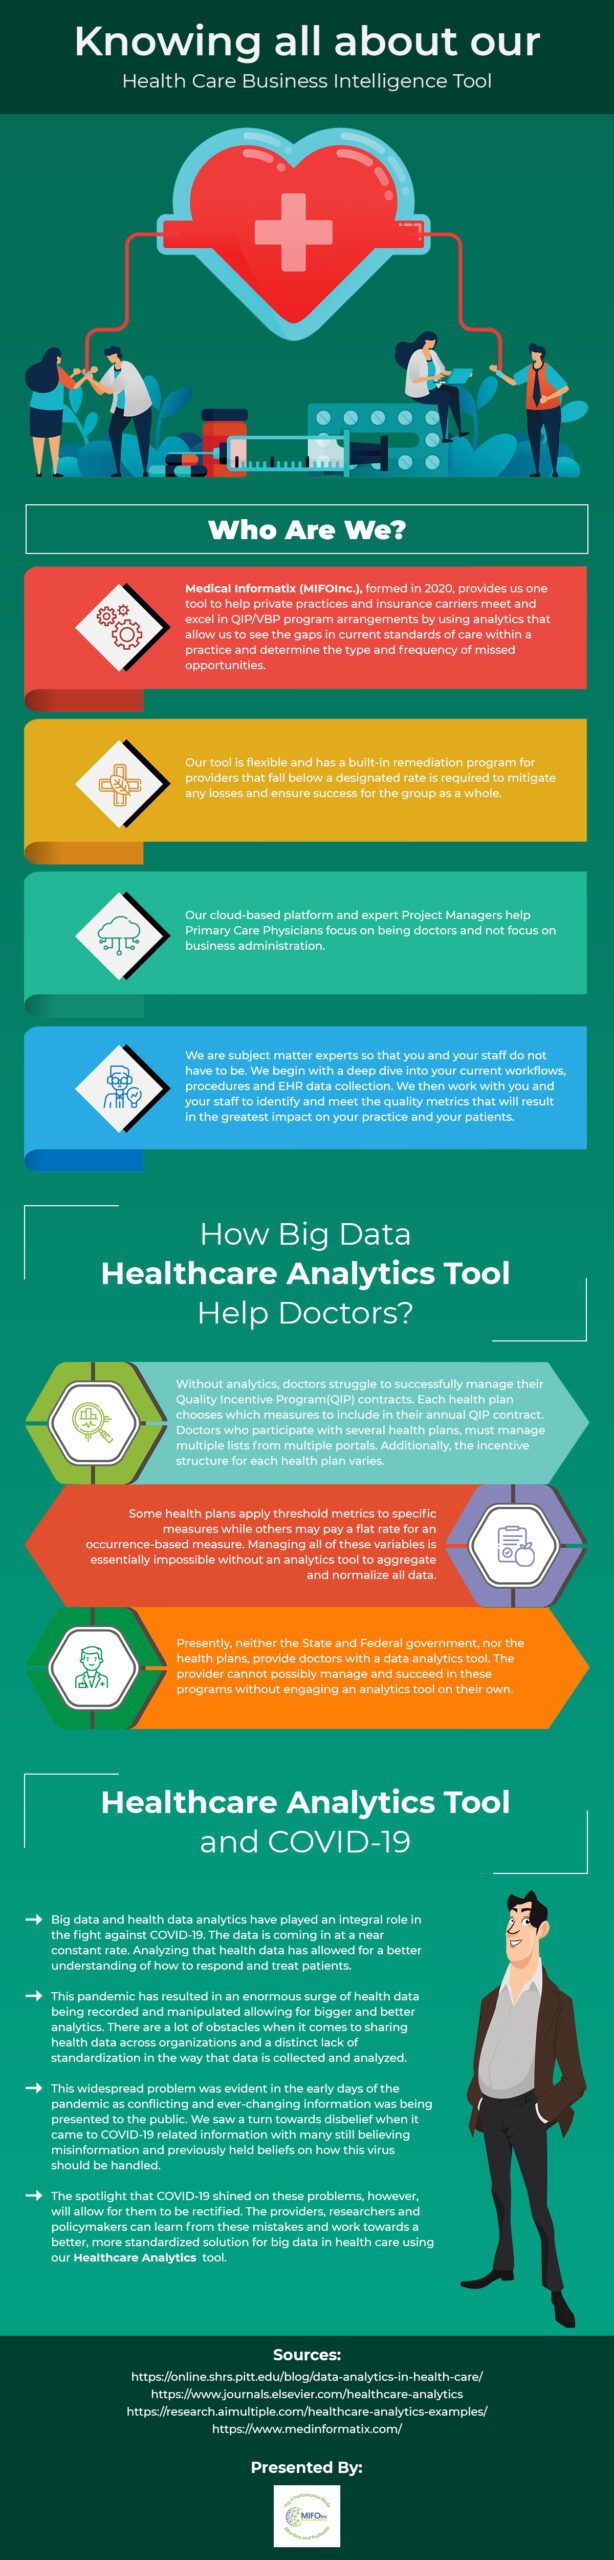 Knowing all about our Health Care Business Intelligence Tool